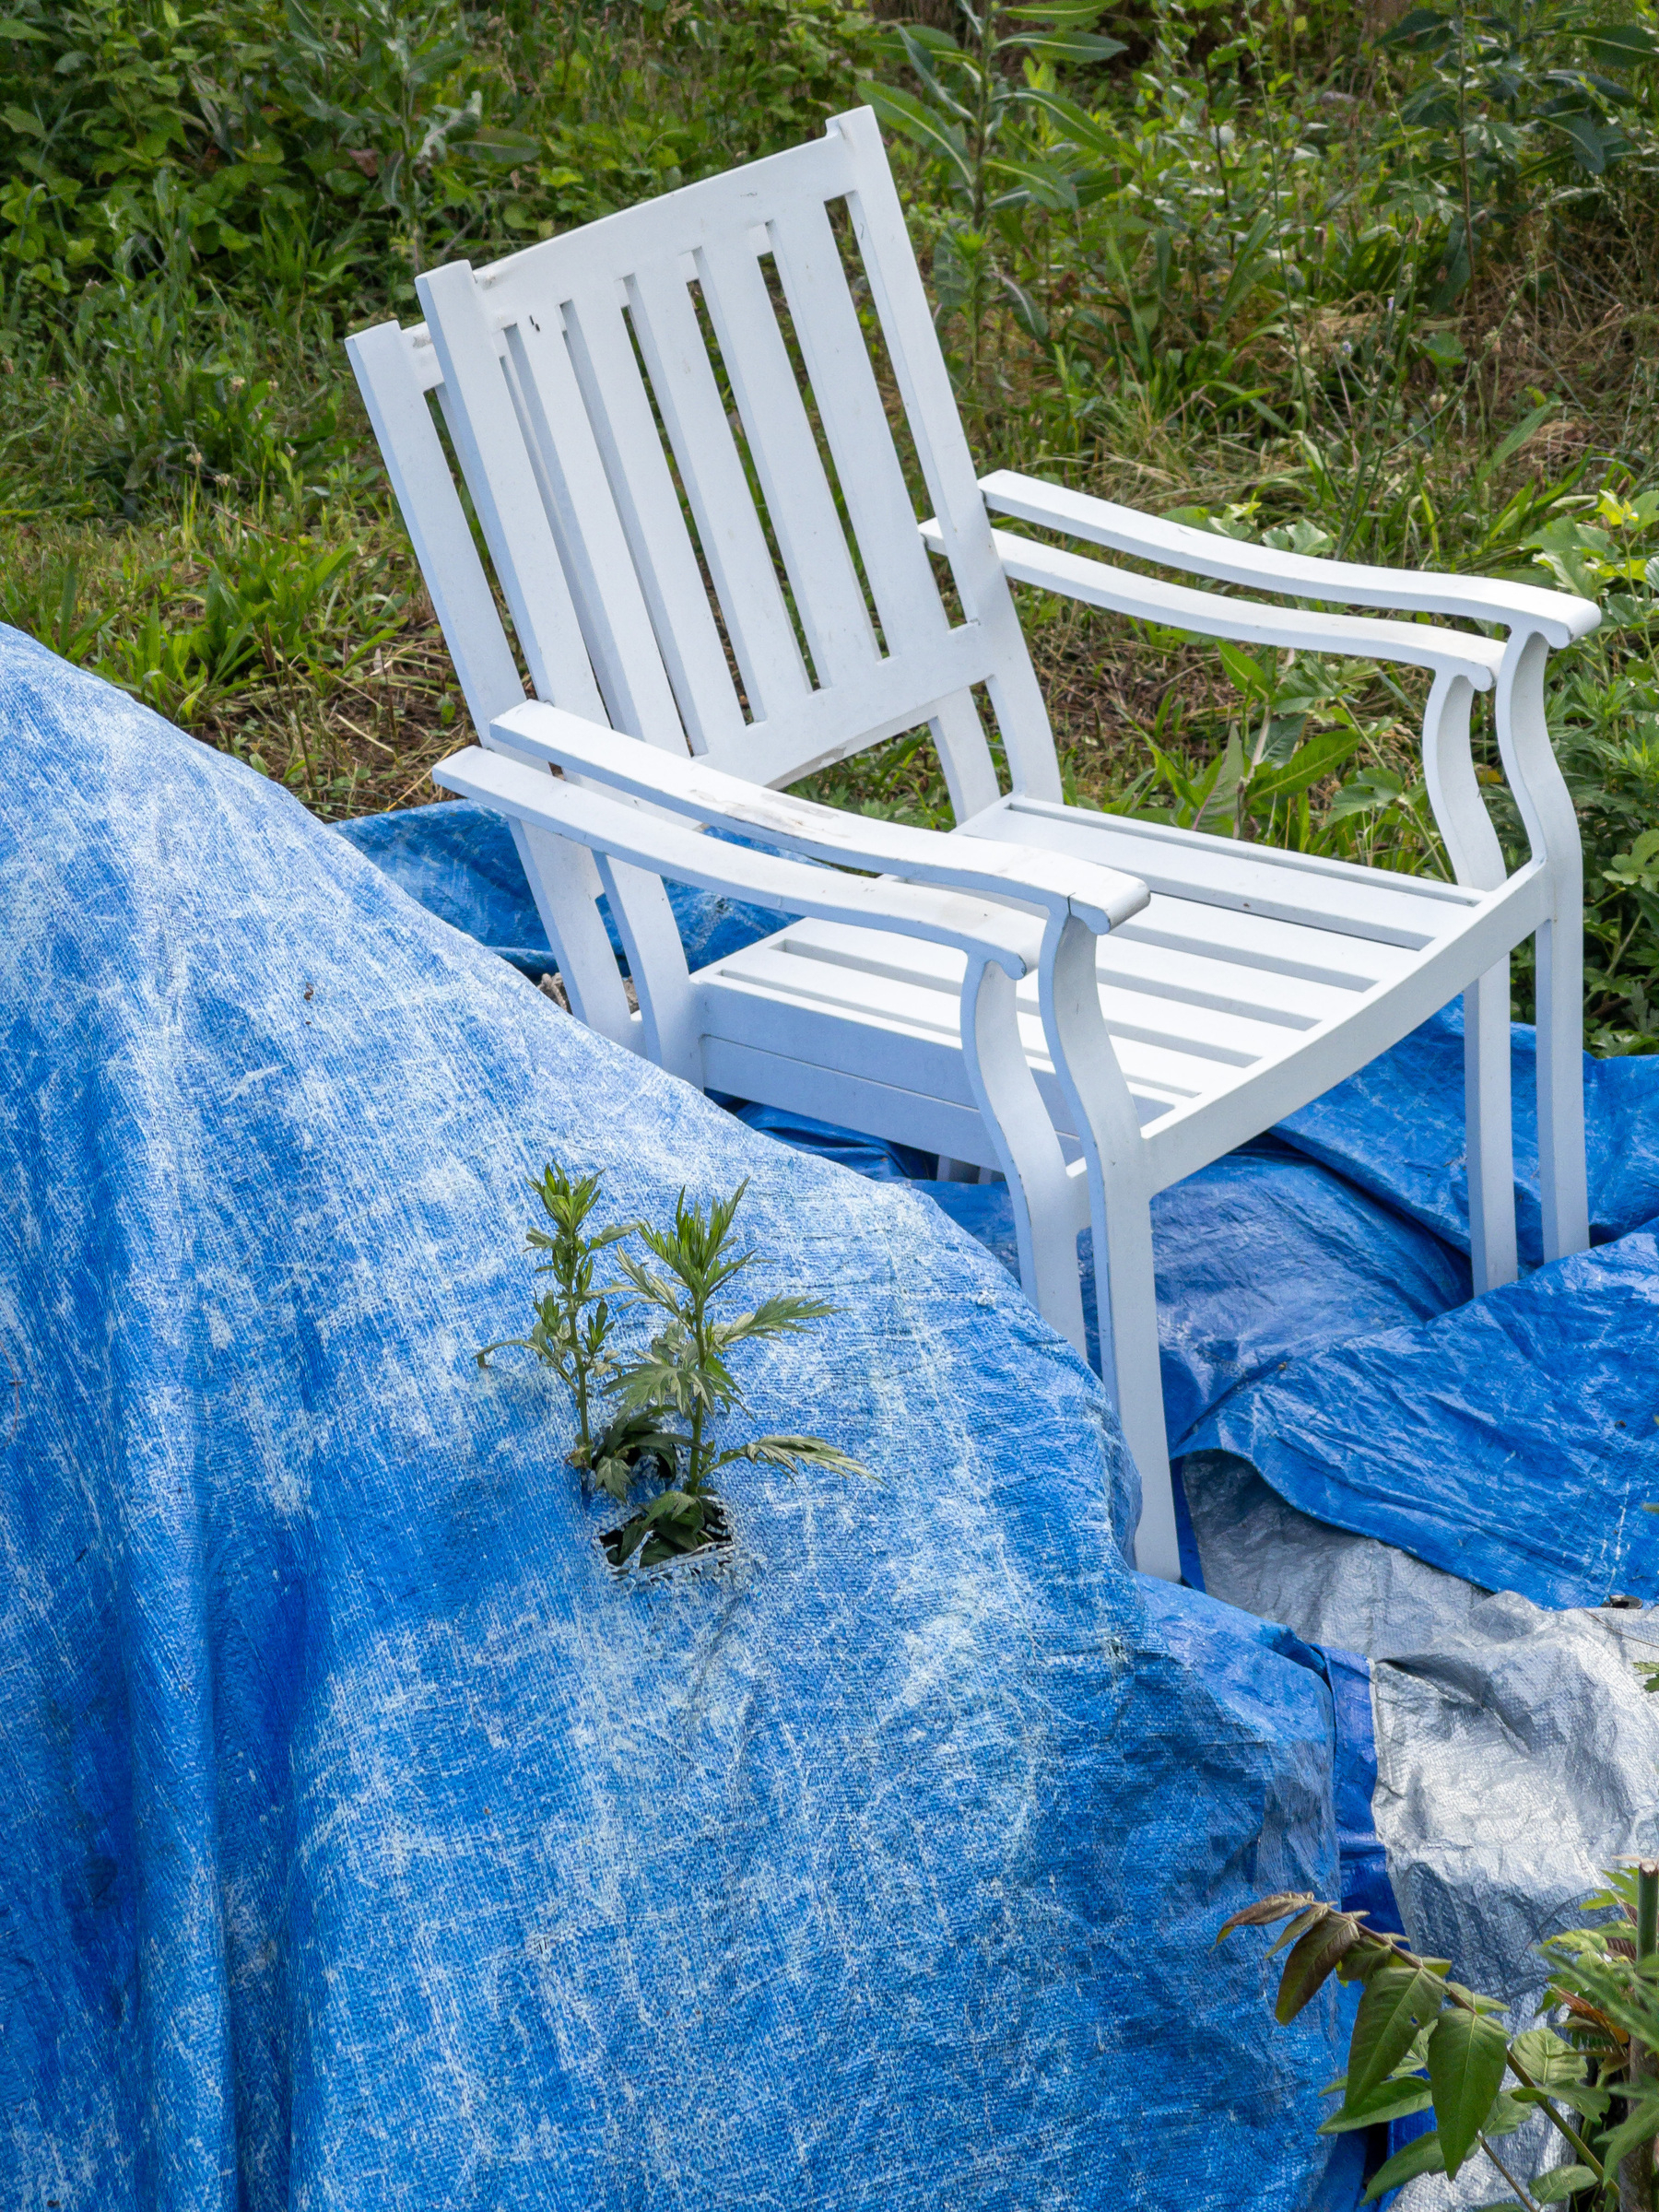 2 white plastic chairs stacked with blue plastic tarp covering a mound of dirt.